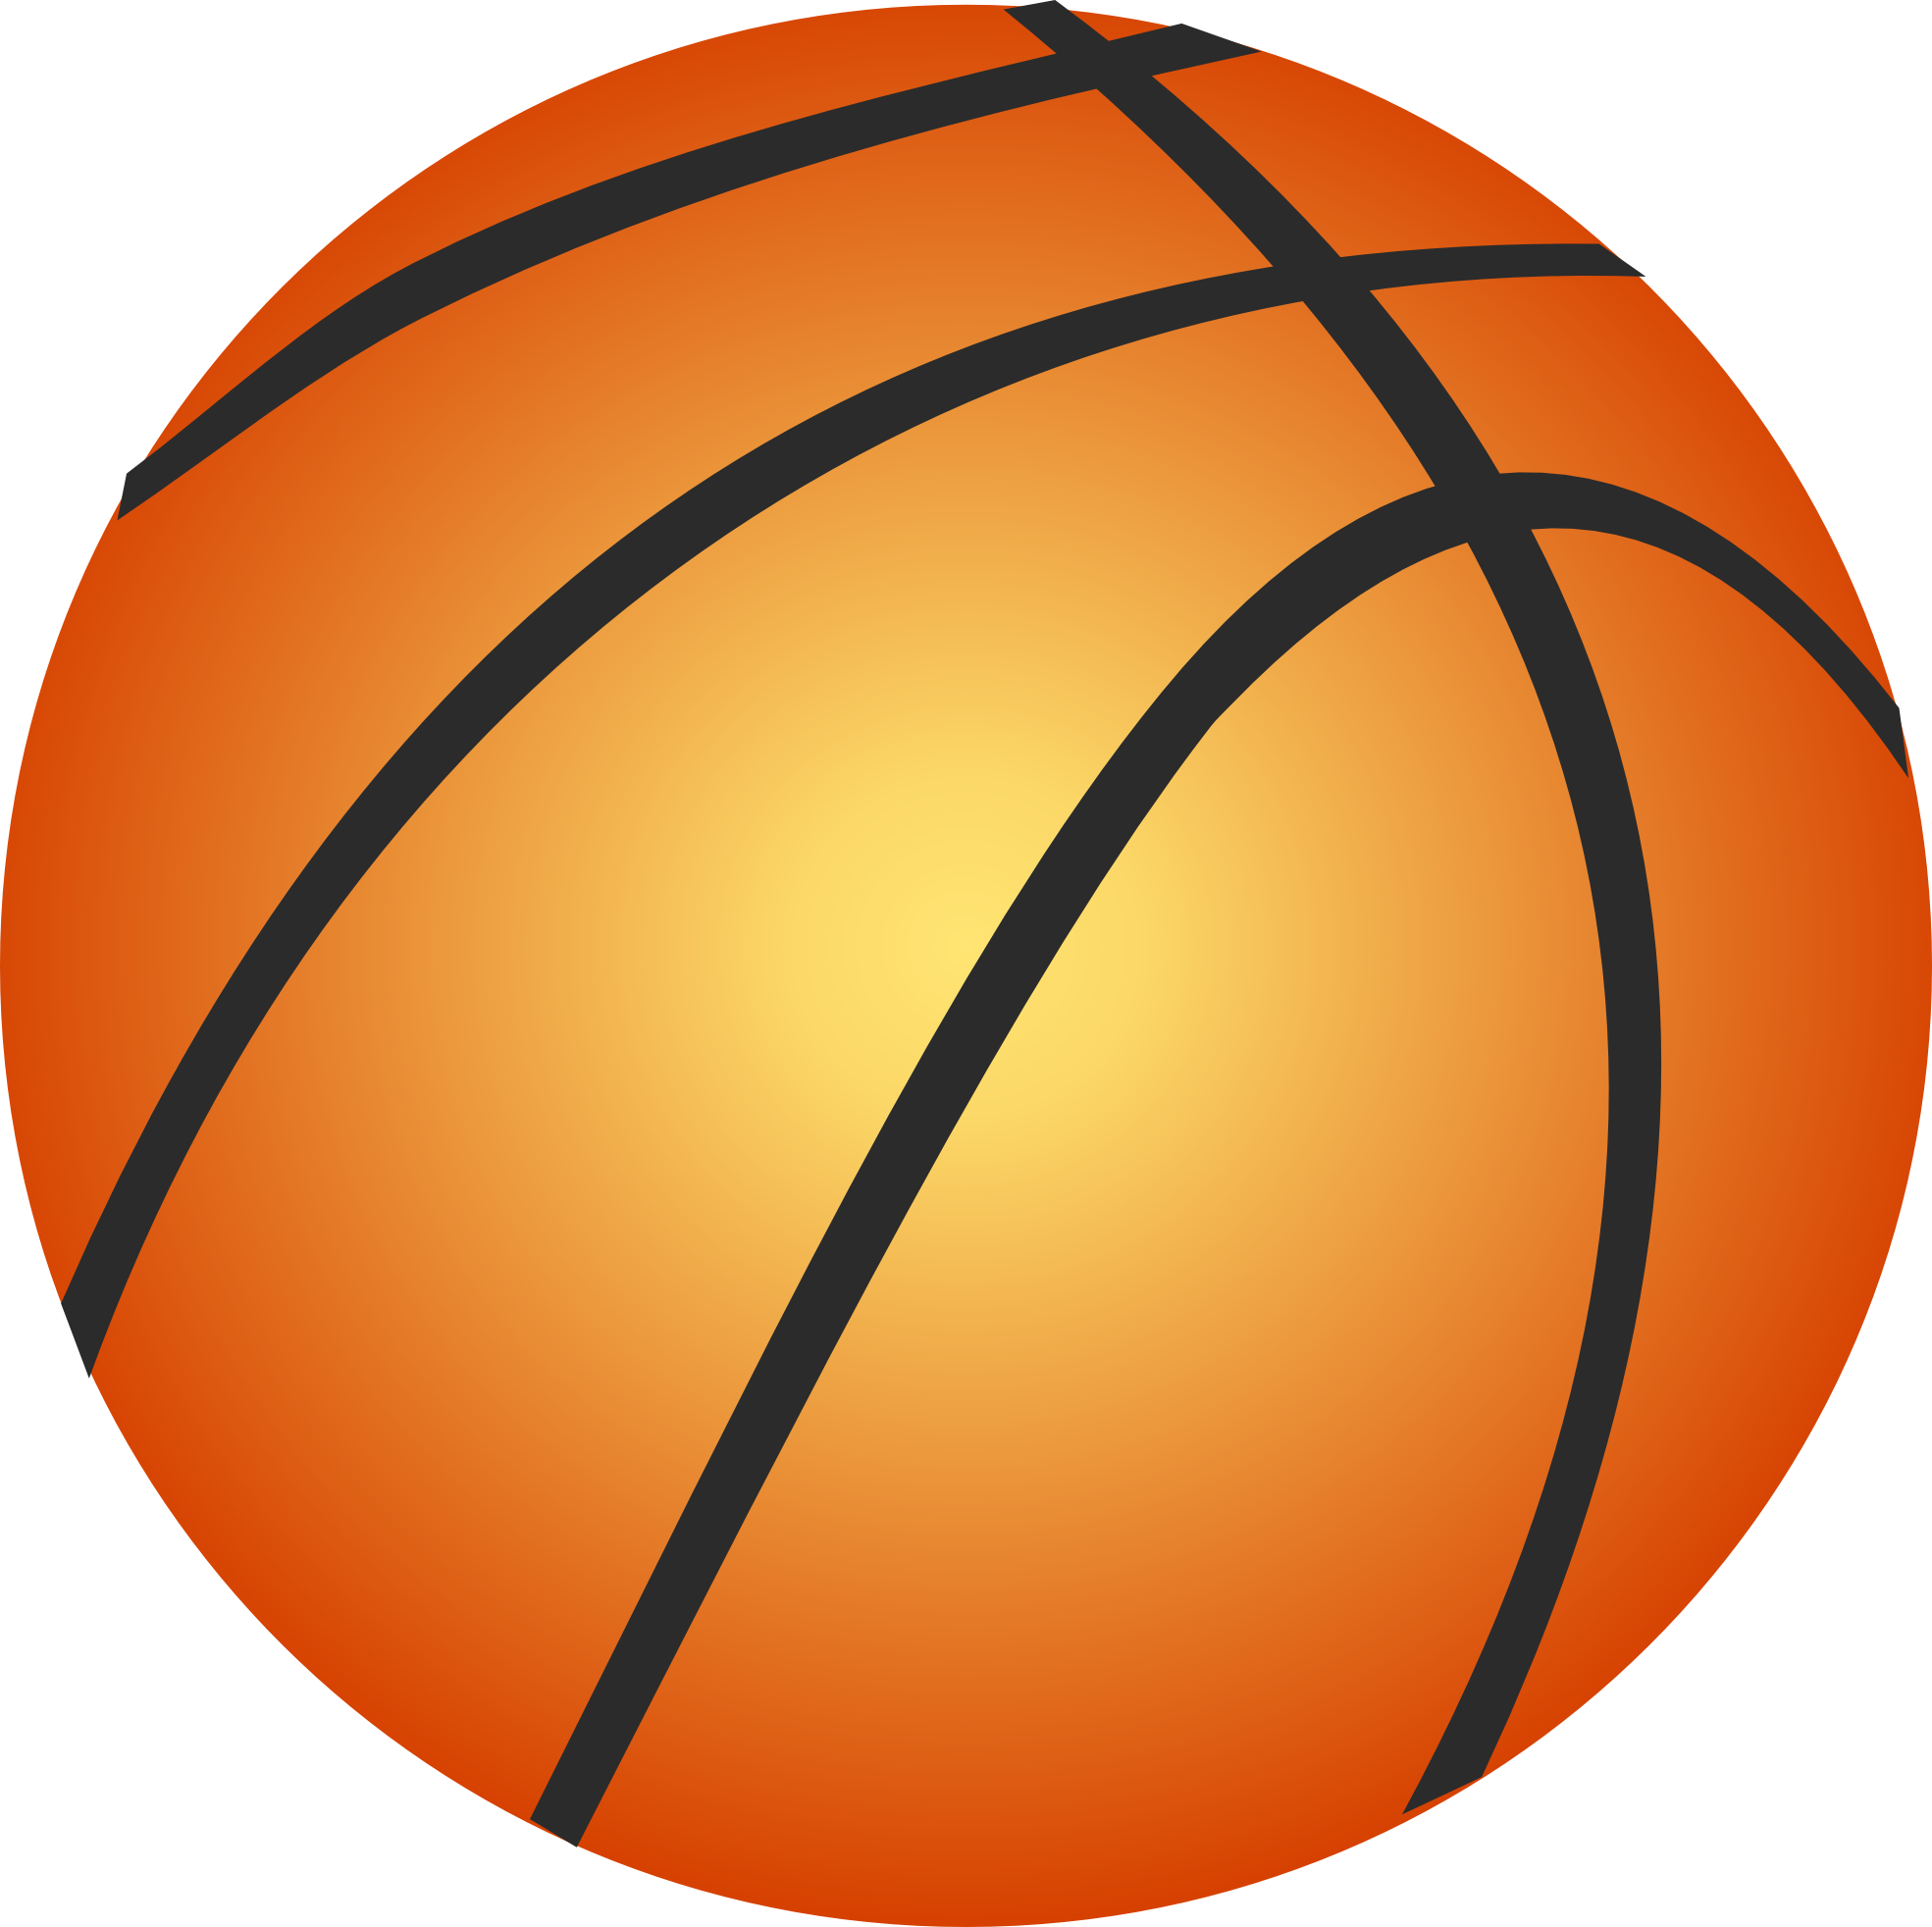 basketball court clipart blac - Basketball Clipart Images